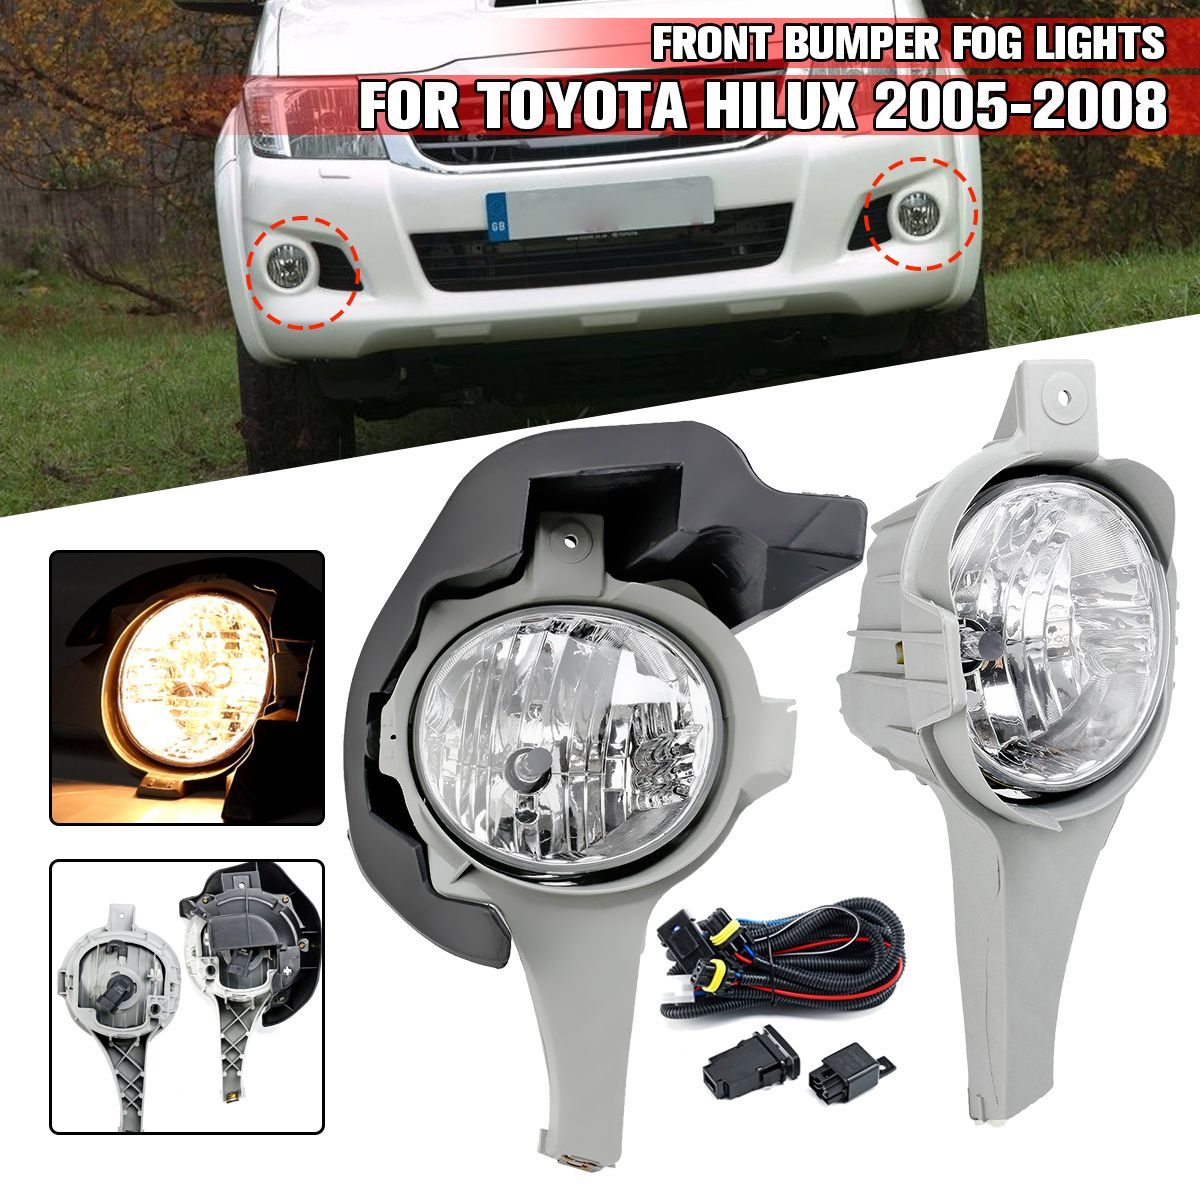 Pair-Car-Front-Bumper-Fog-Lights-Lamps-with-Bulb-Wiring-Harness-For-Toyota-Hilux-2005-2008-1638927